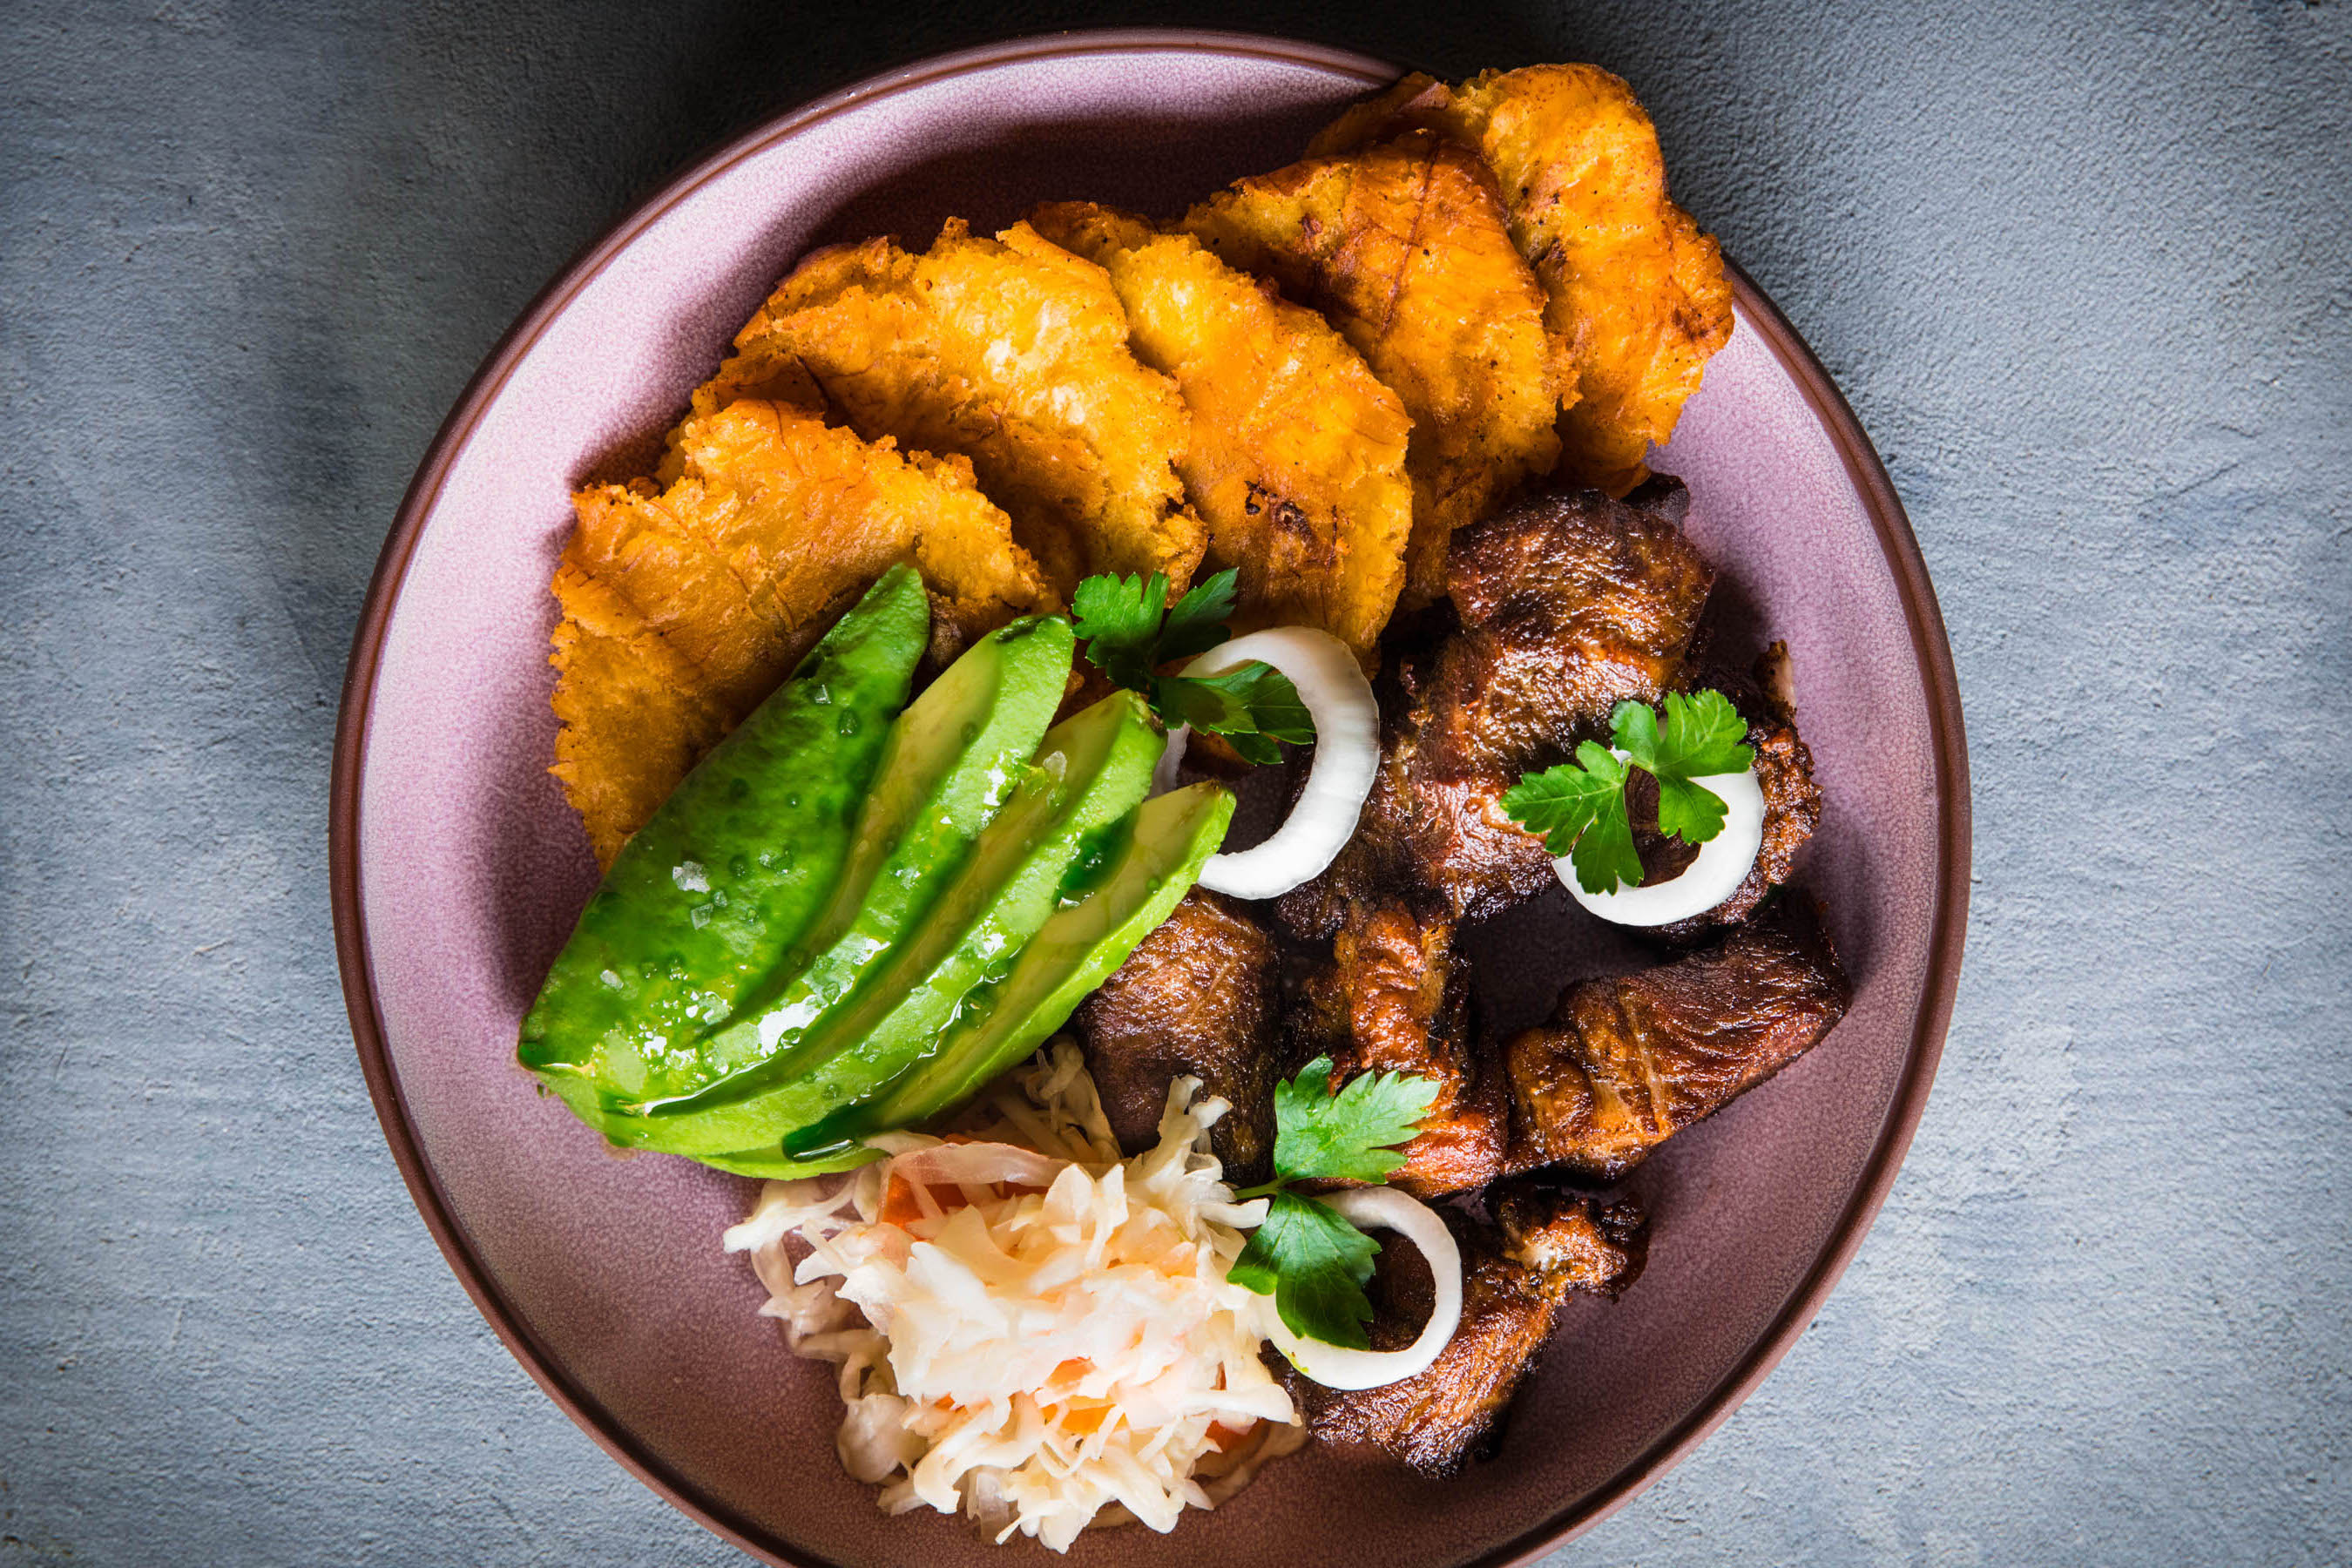 Fried plantains, avocado, pikliz, and more on a plate from Kann.